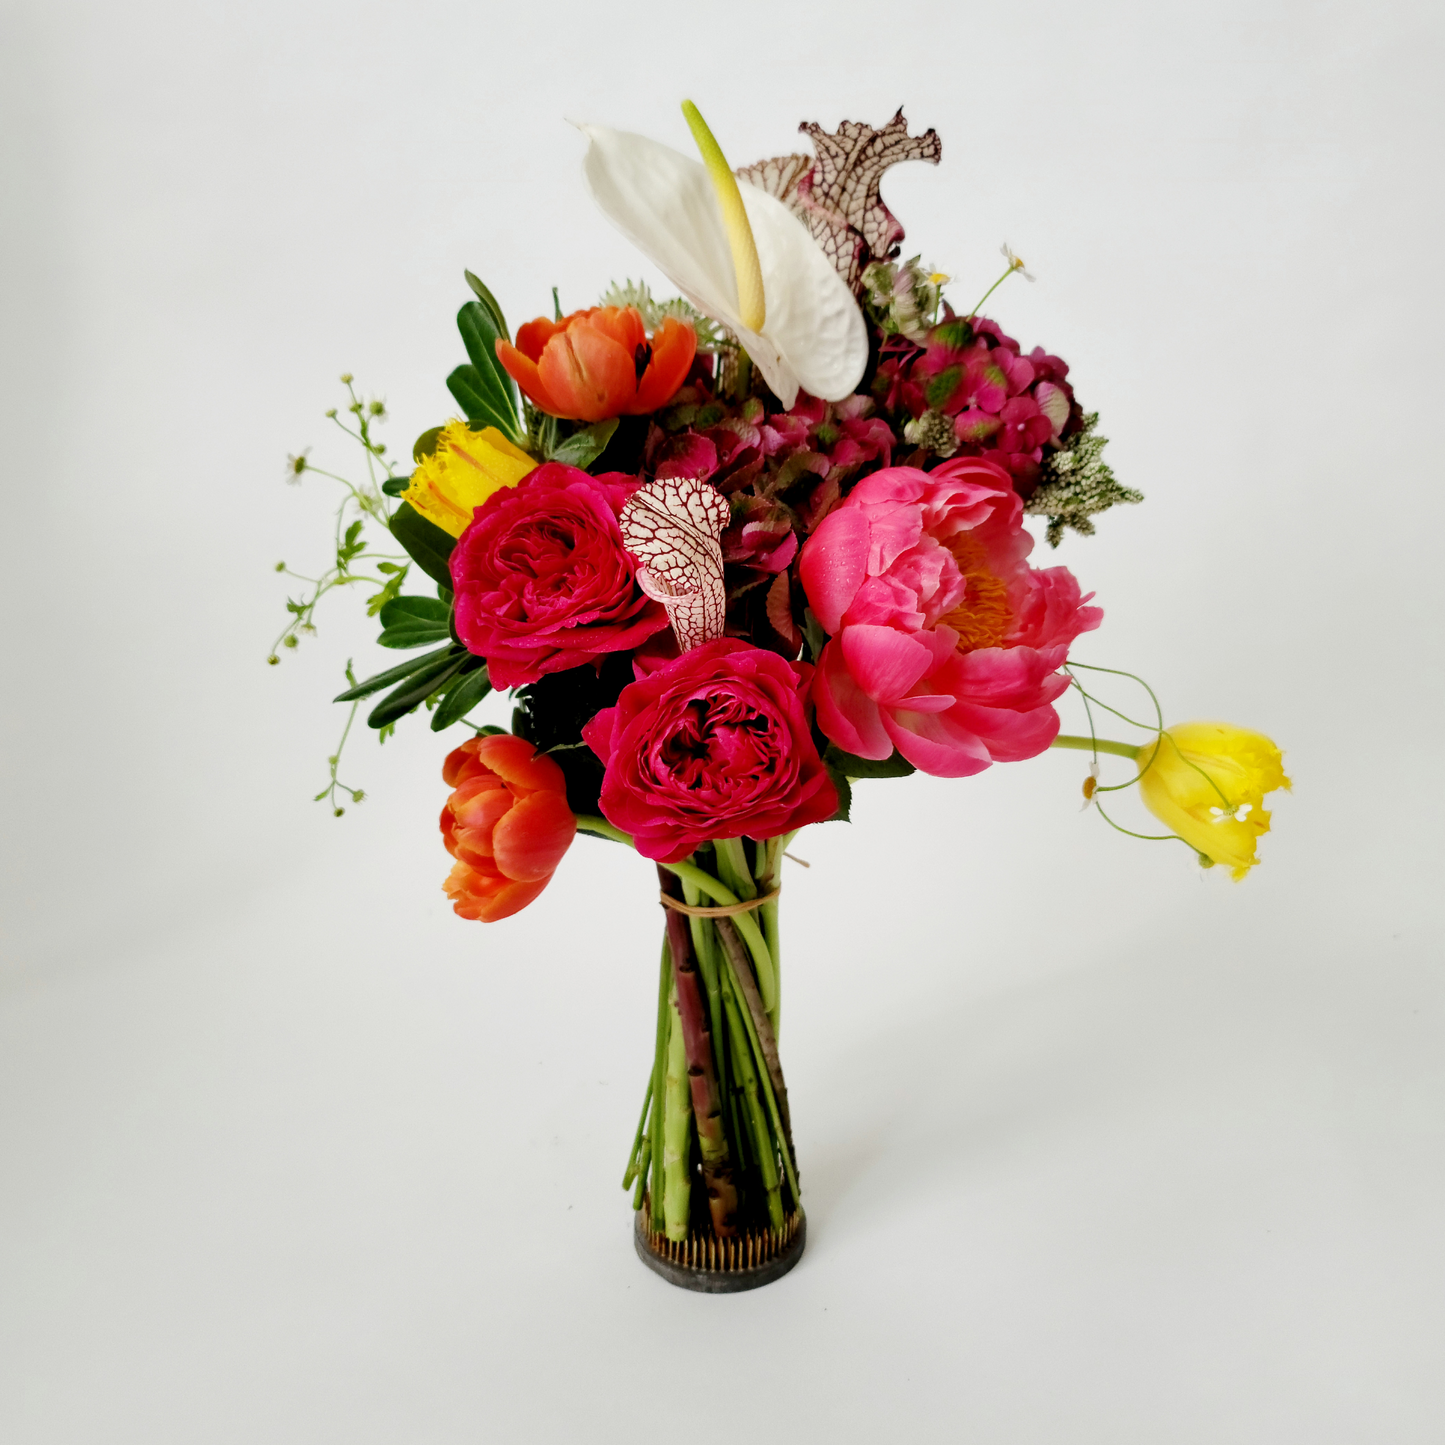 Weekly Floral Subscription